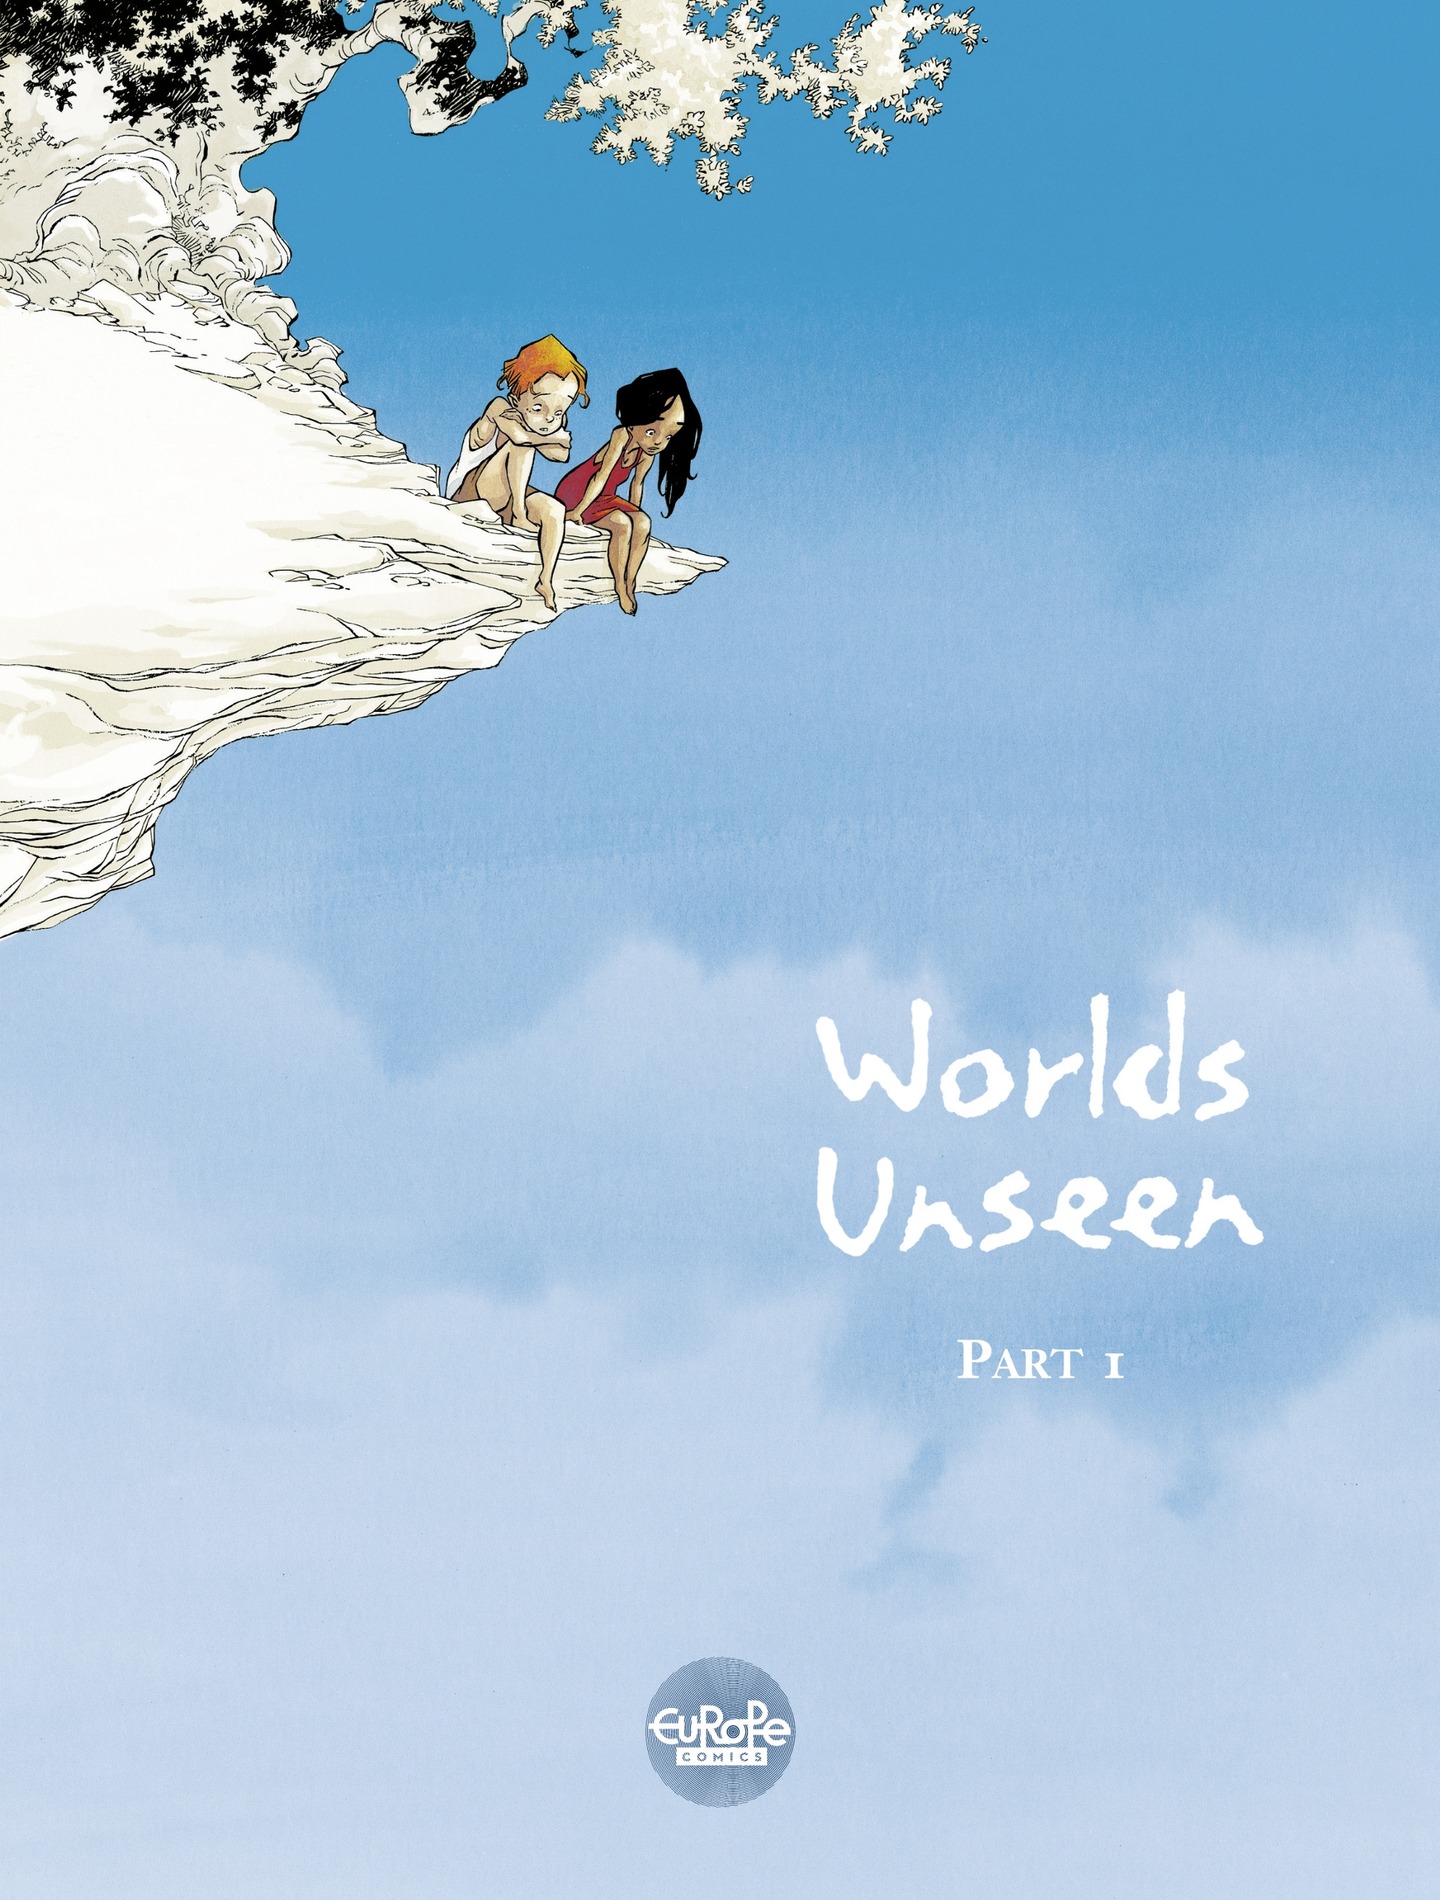 Read online Worlds Unseen comic -  Issue # TPB 1 - 1